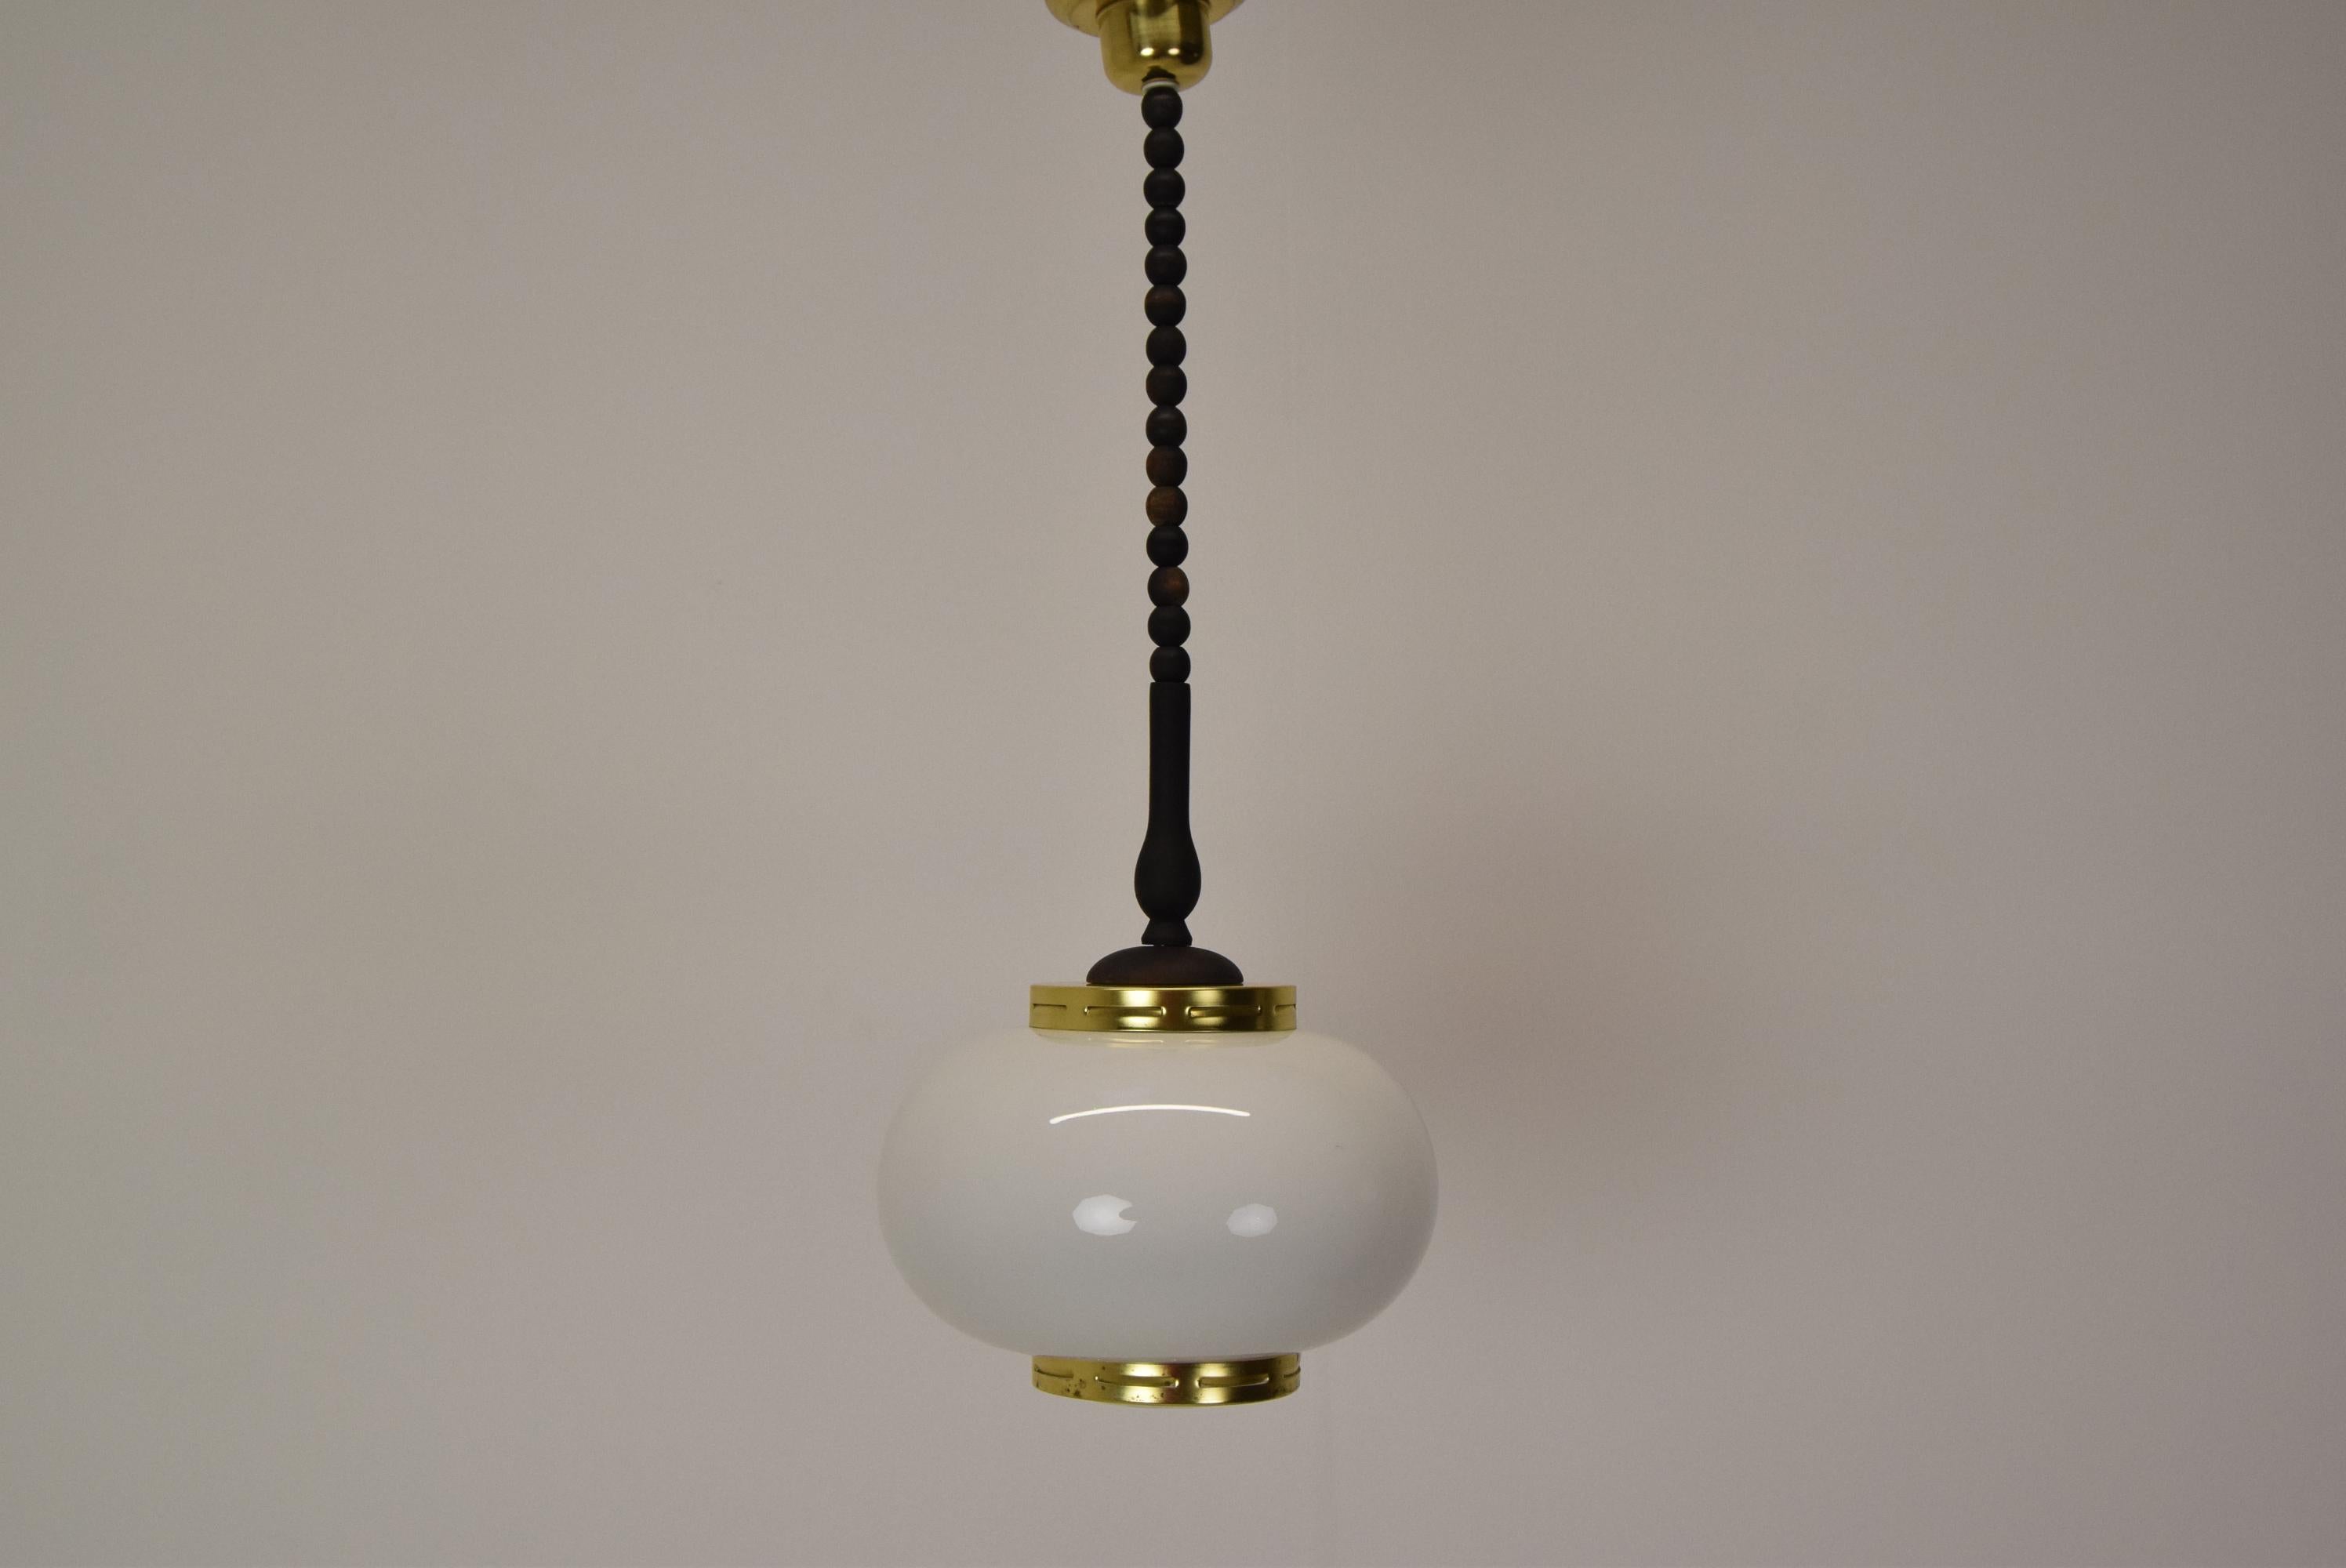 Made of glass, brass, wood
1x E27 or E26 bulb
With aged Patina
US wiring compatible
Re-polished
Fully functional
Good Original condition.